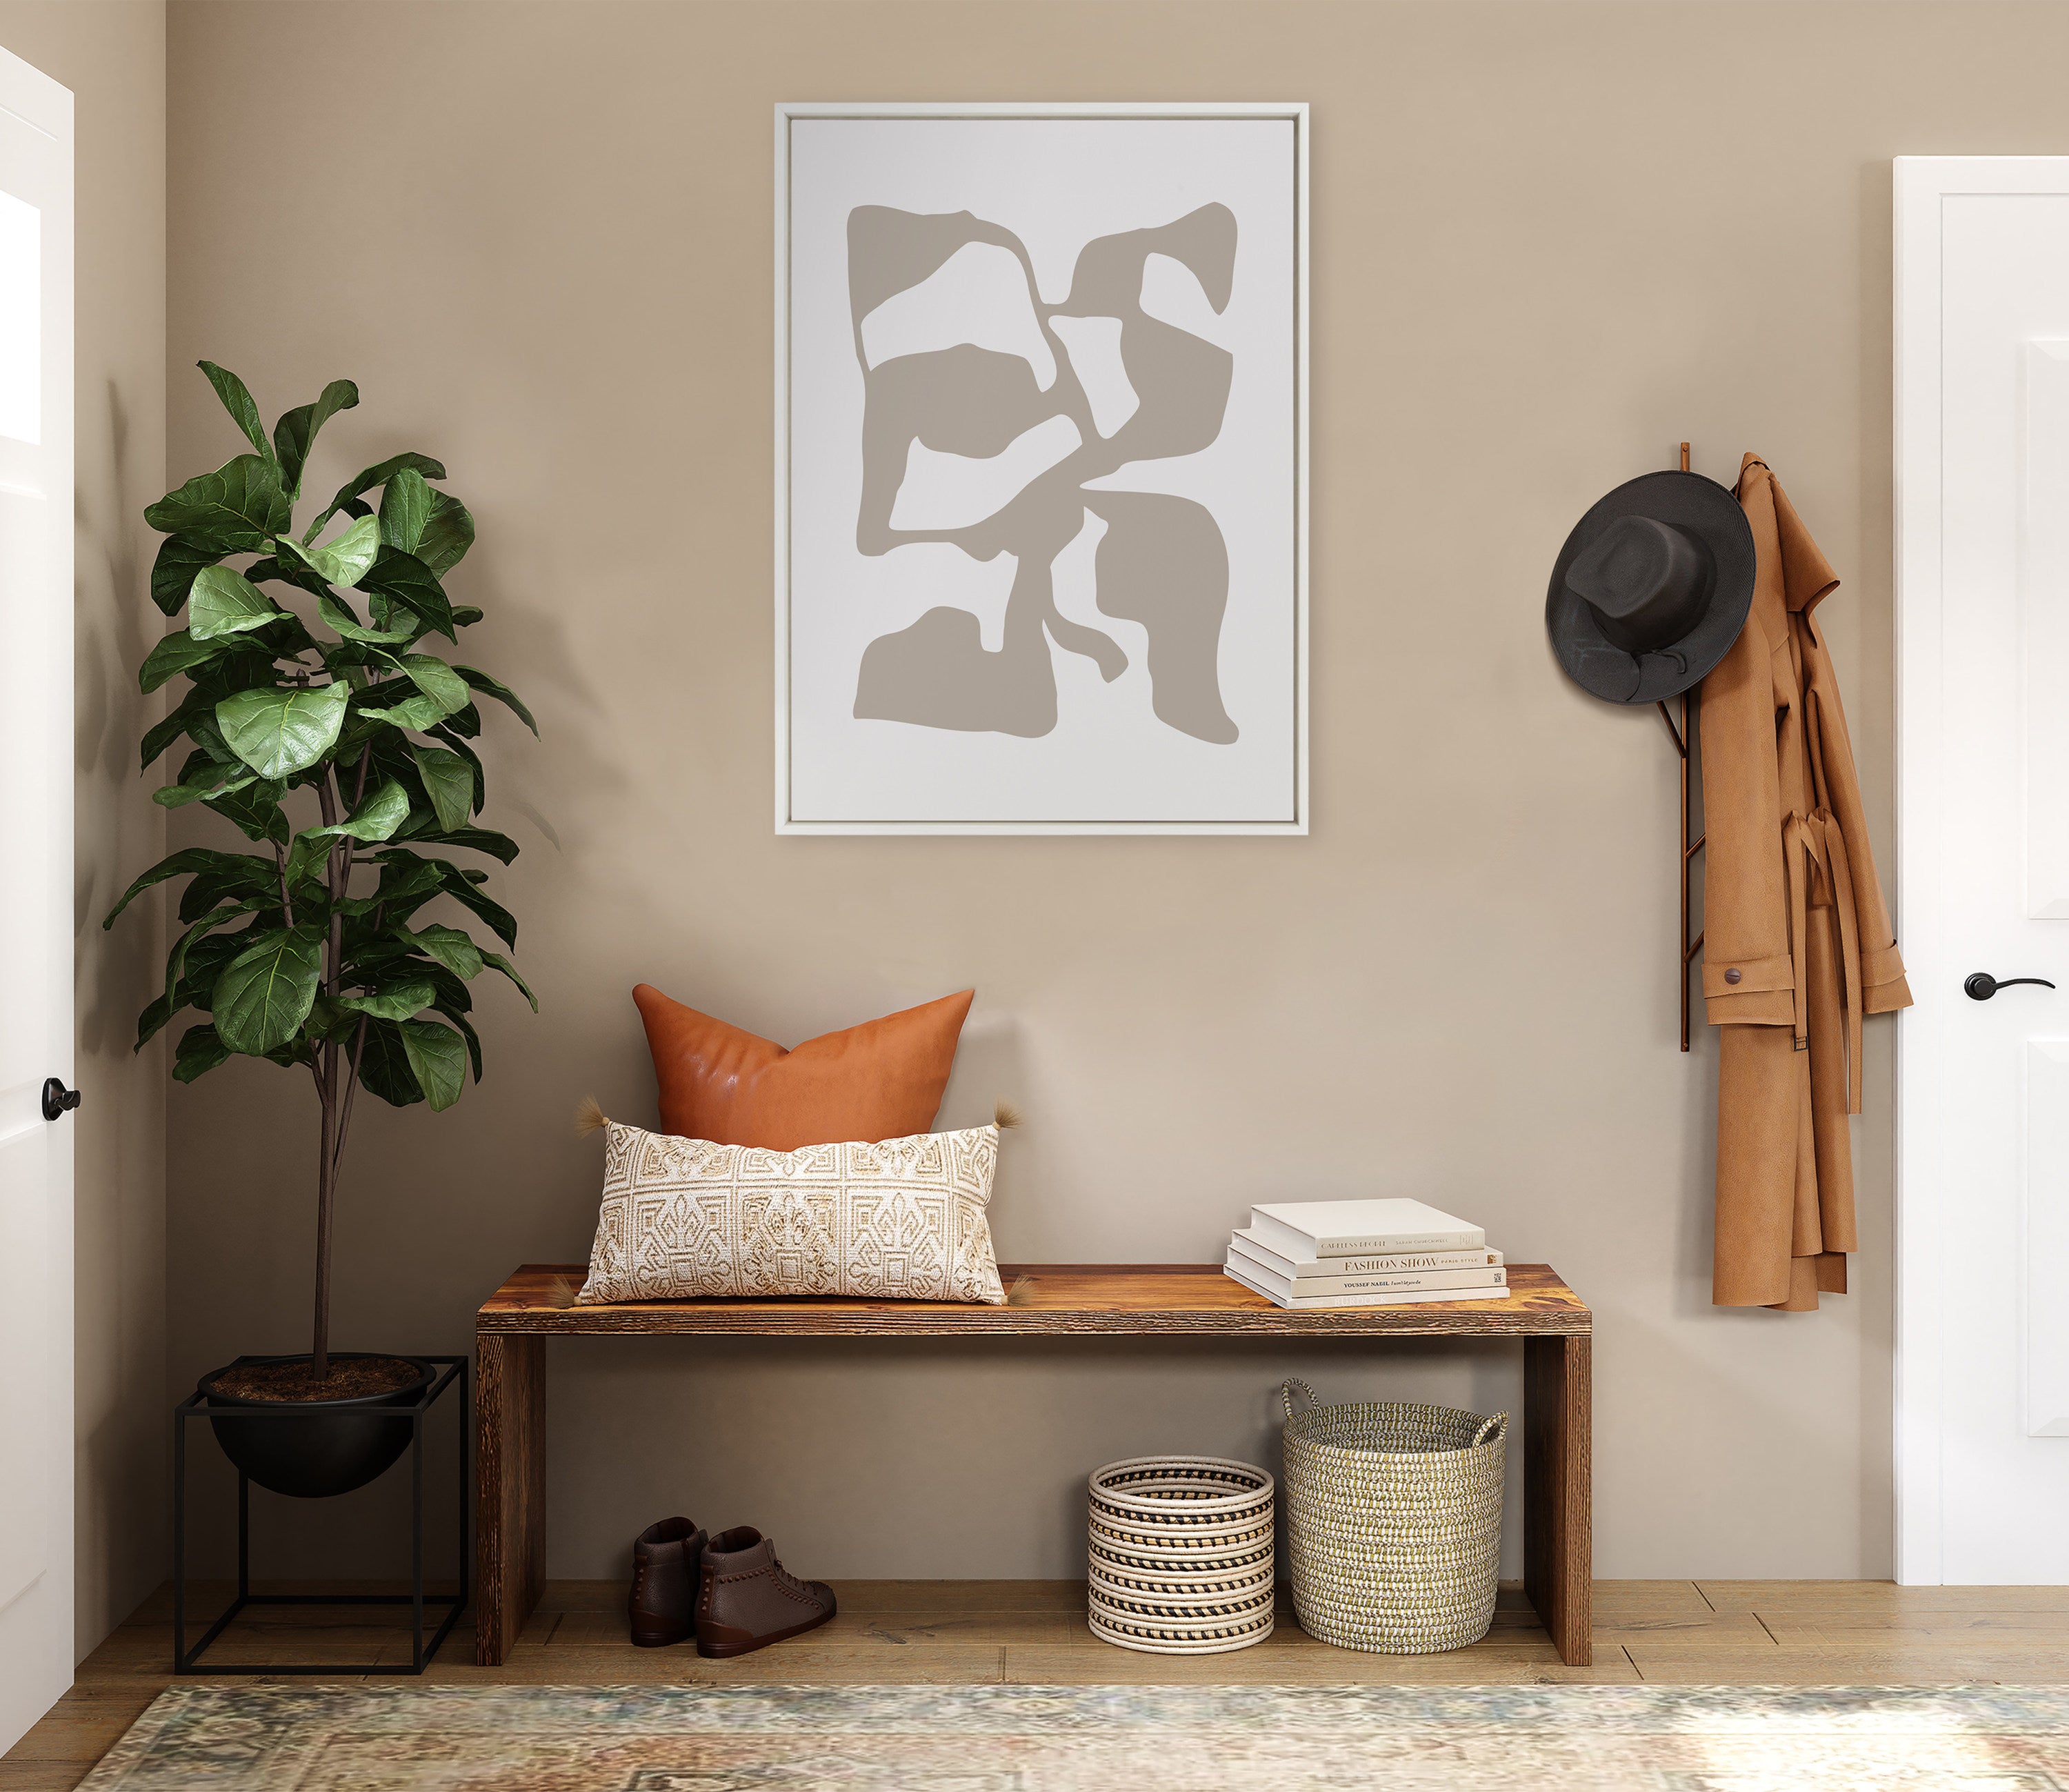 Sylvie Distorted Shapes of Tan and White Framed Canvas by The Creative Bunch Studio